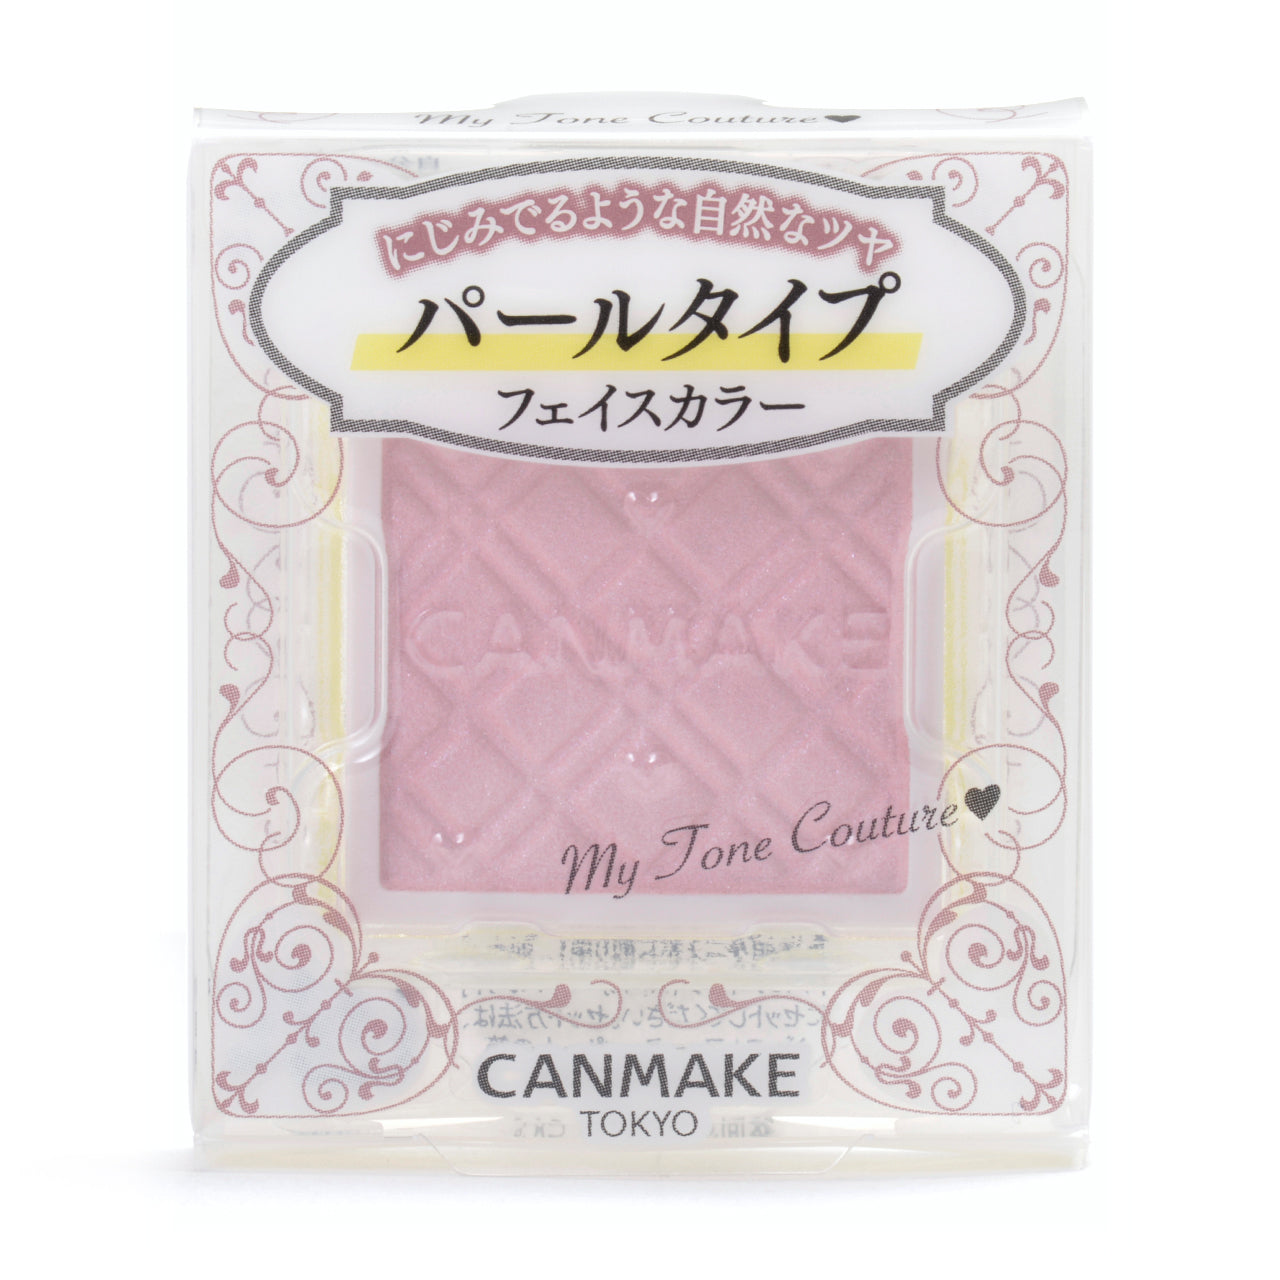 CANMAKE My Tone Couture (Pearl Type)